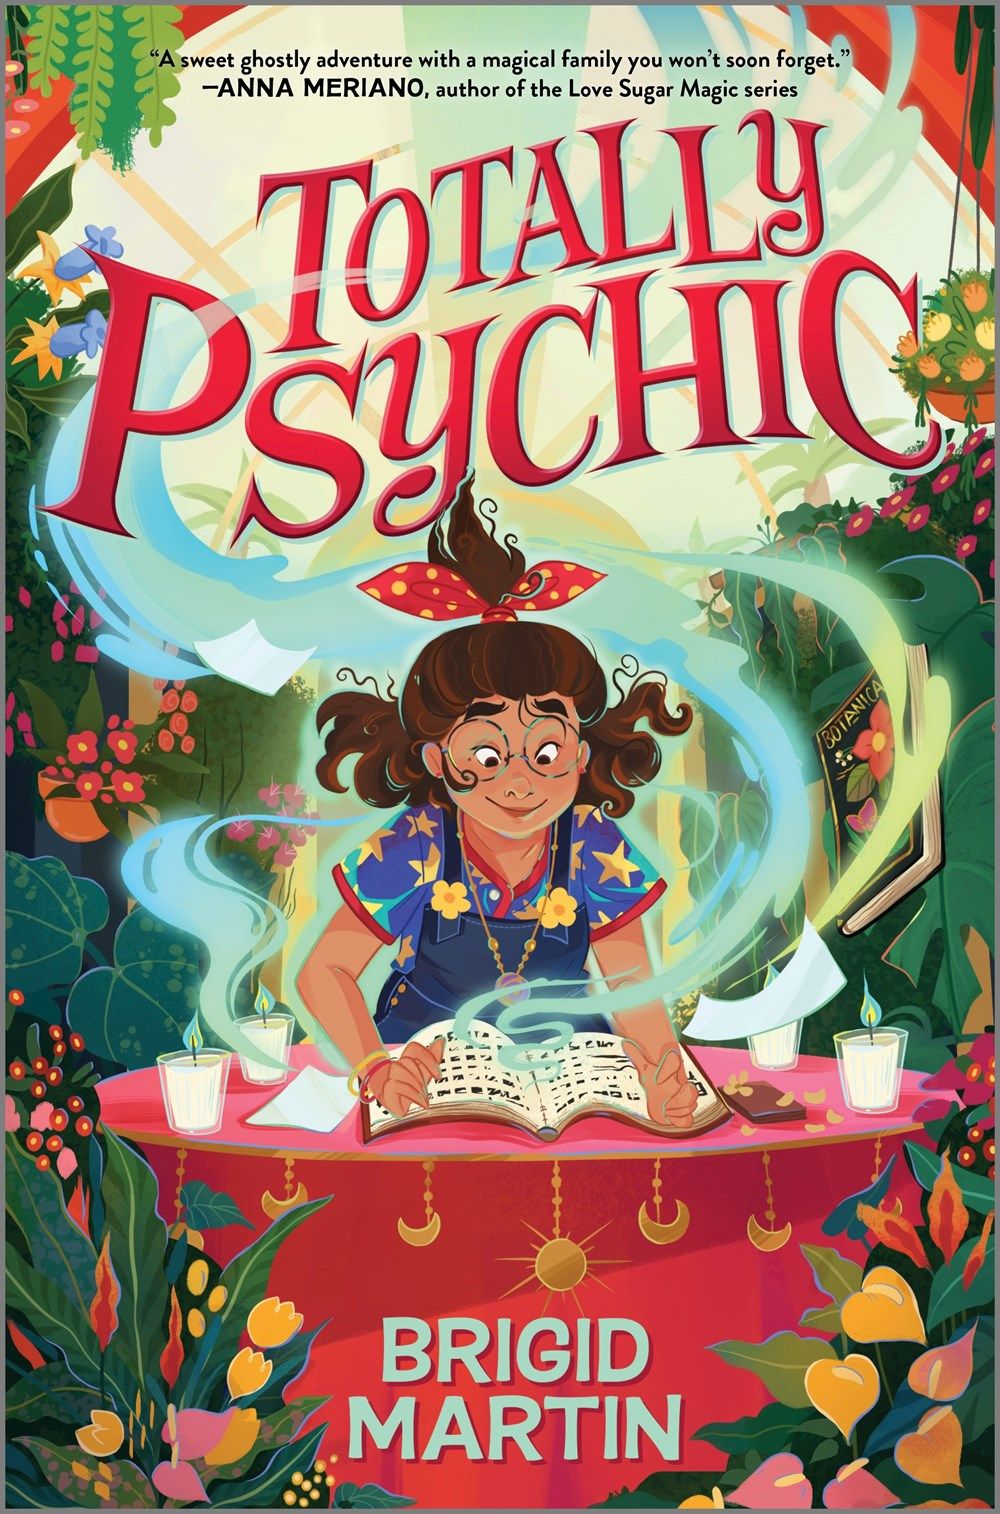 Cover of Totally Psychic by Martin